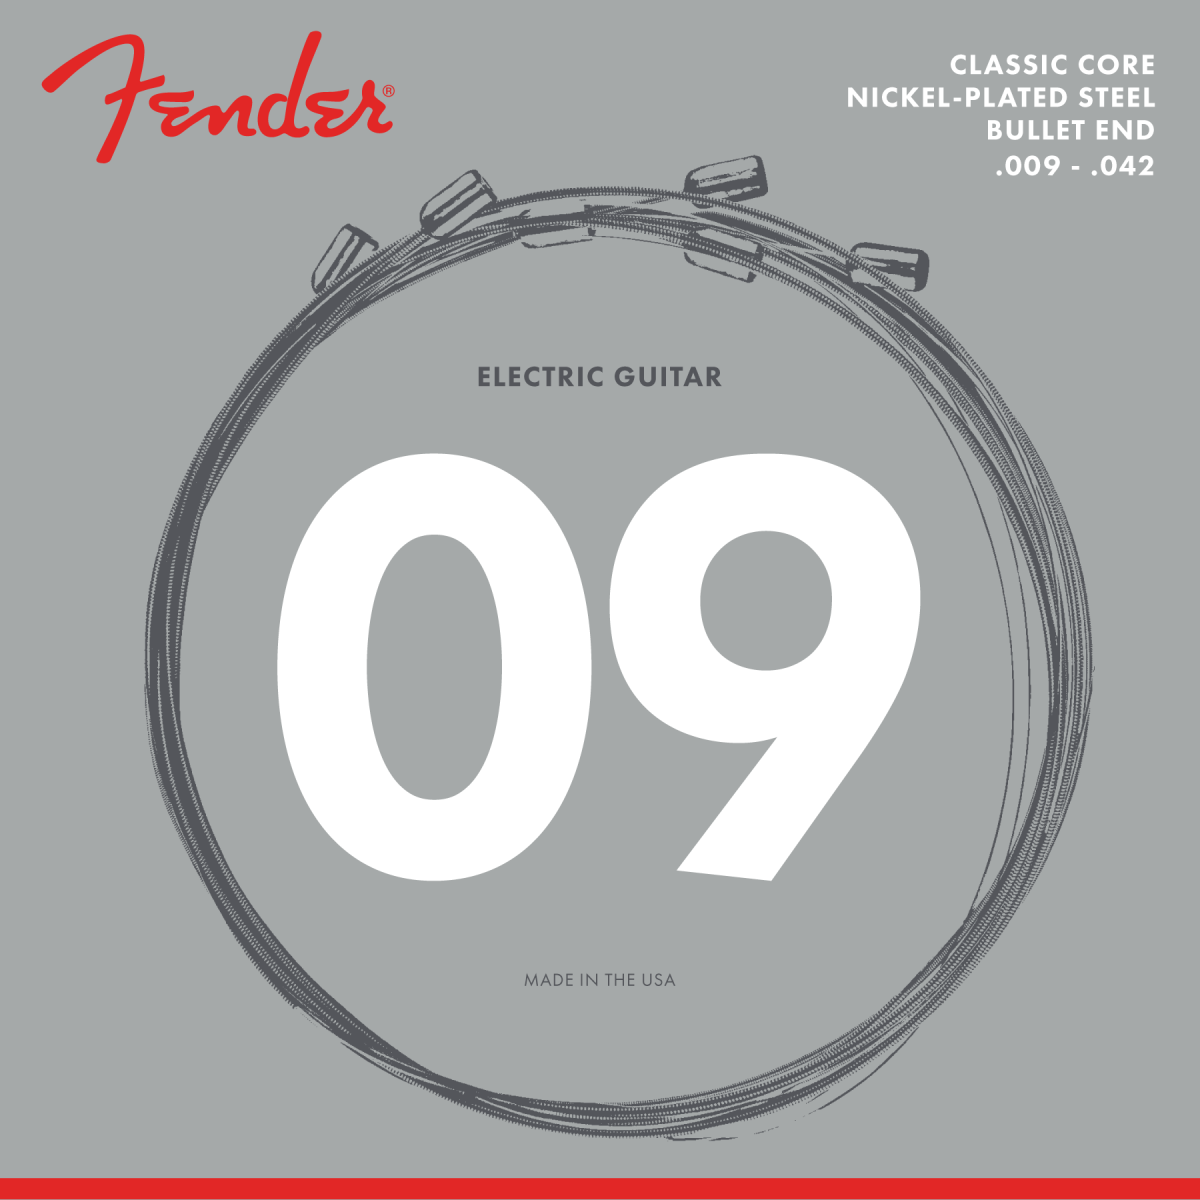 Fender Classic Core Electric Guitar Strings, 3255L, Nickel Plated Steel, Bullet Ends (.009-.042)